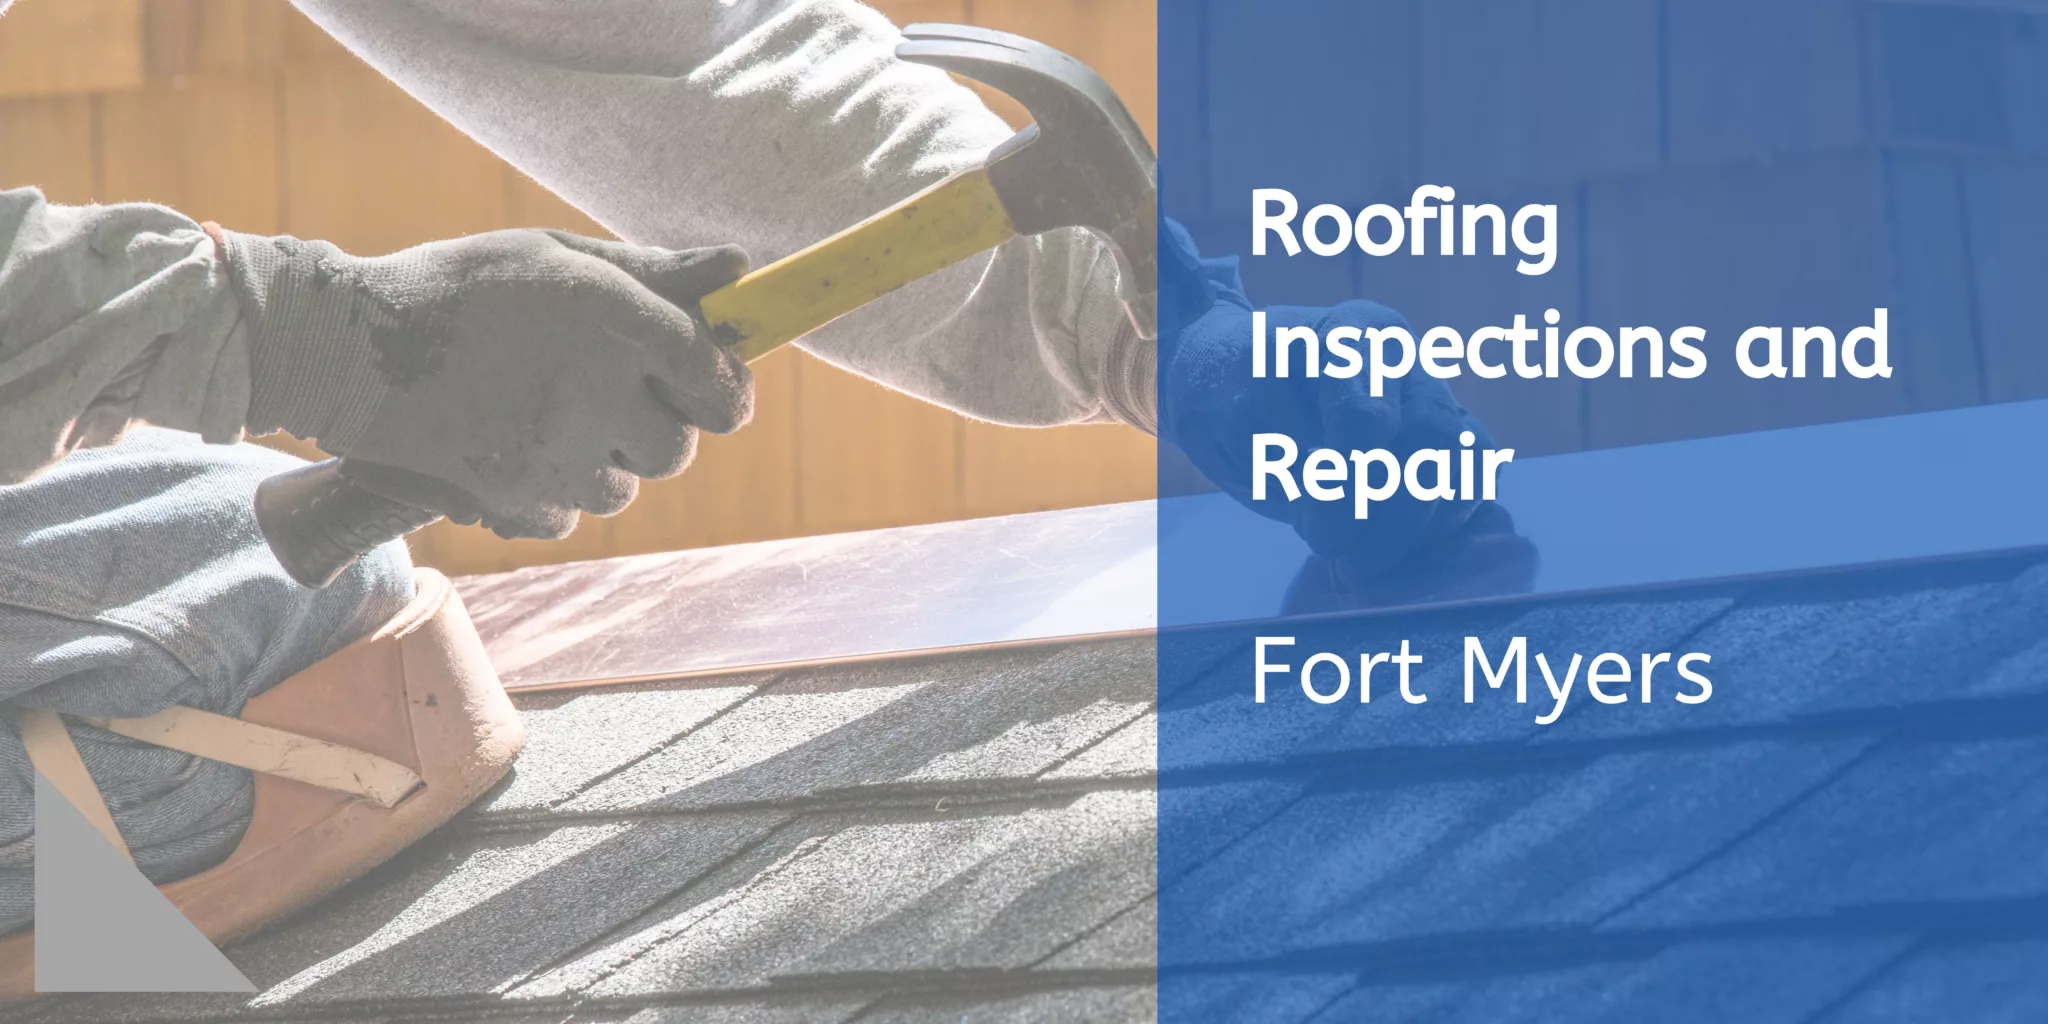 Fort Myers Roofing Inspections and Repair